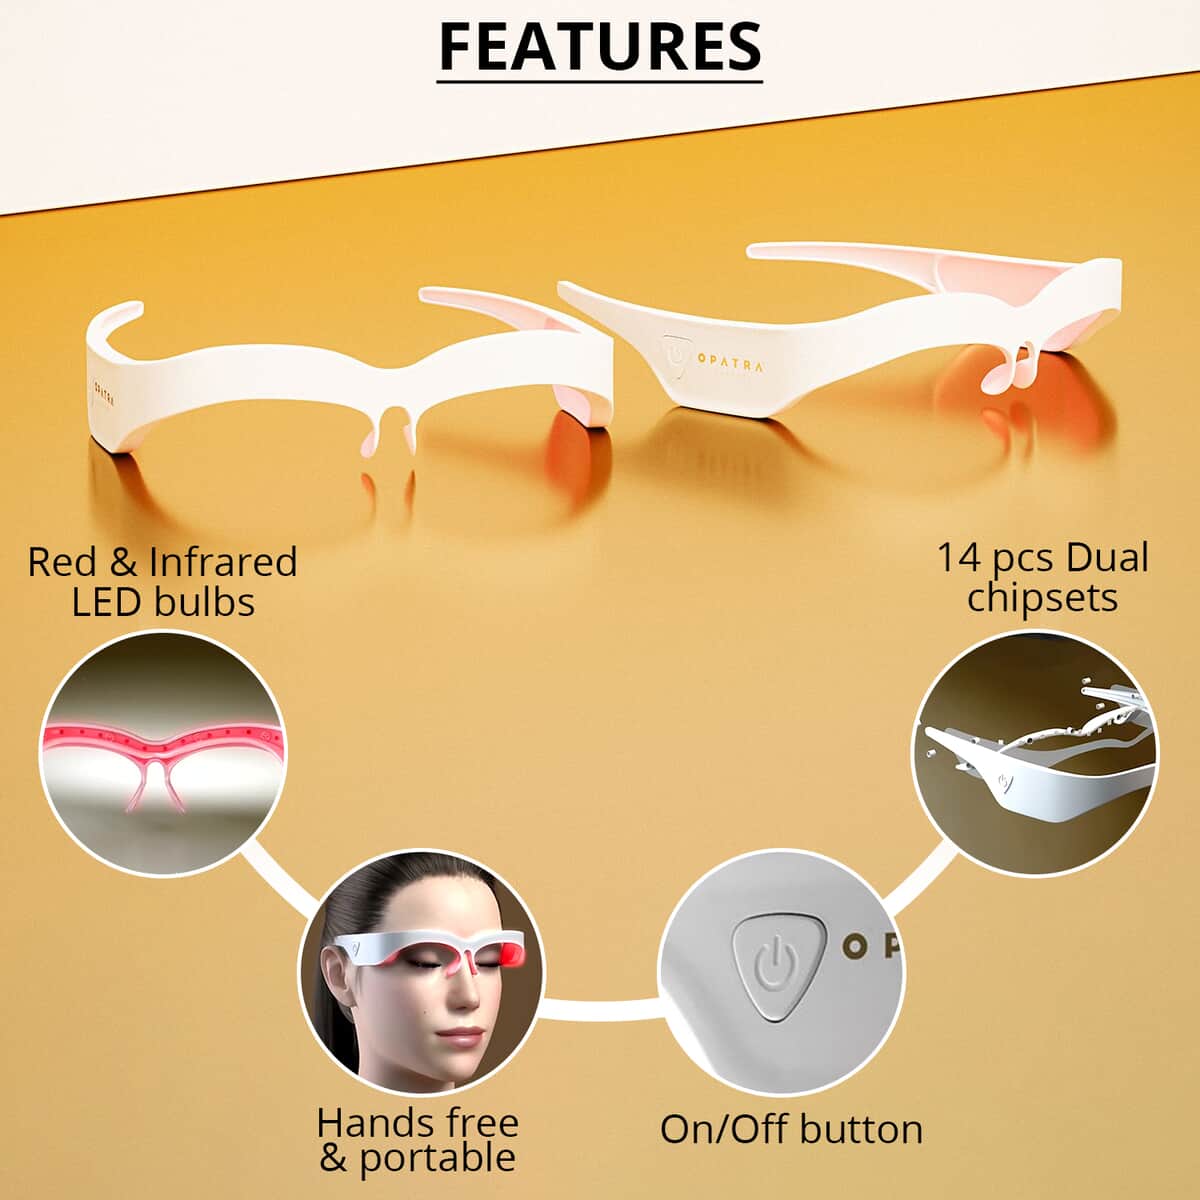 Opatra Ibrow- Eyebrow Device For Fuller-Looking Brows With Lifetime Warranty image number 2